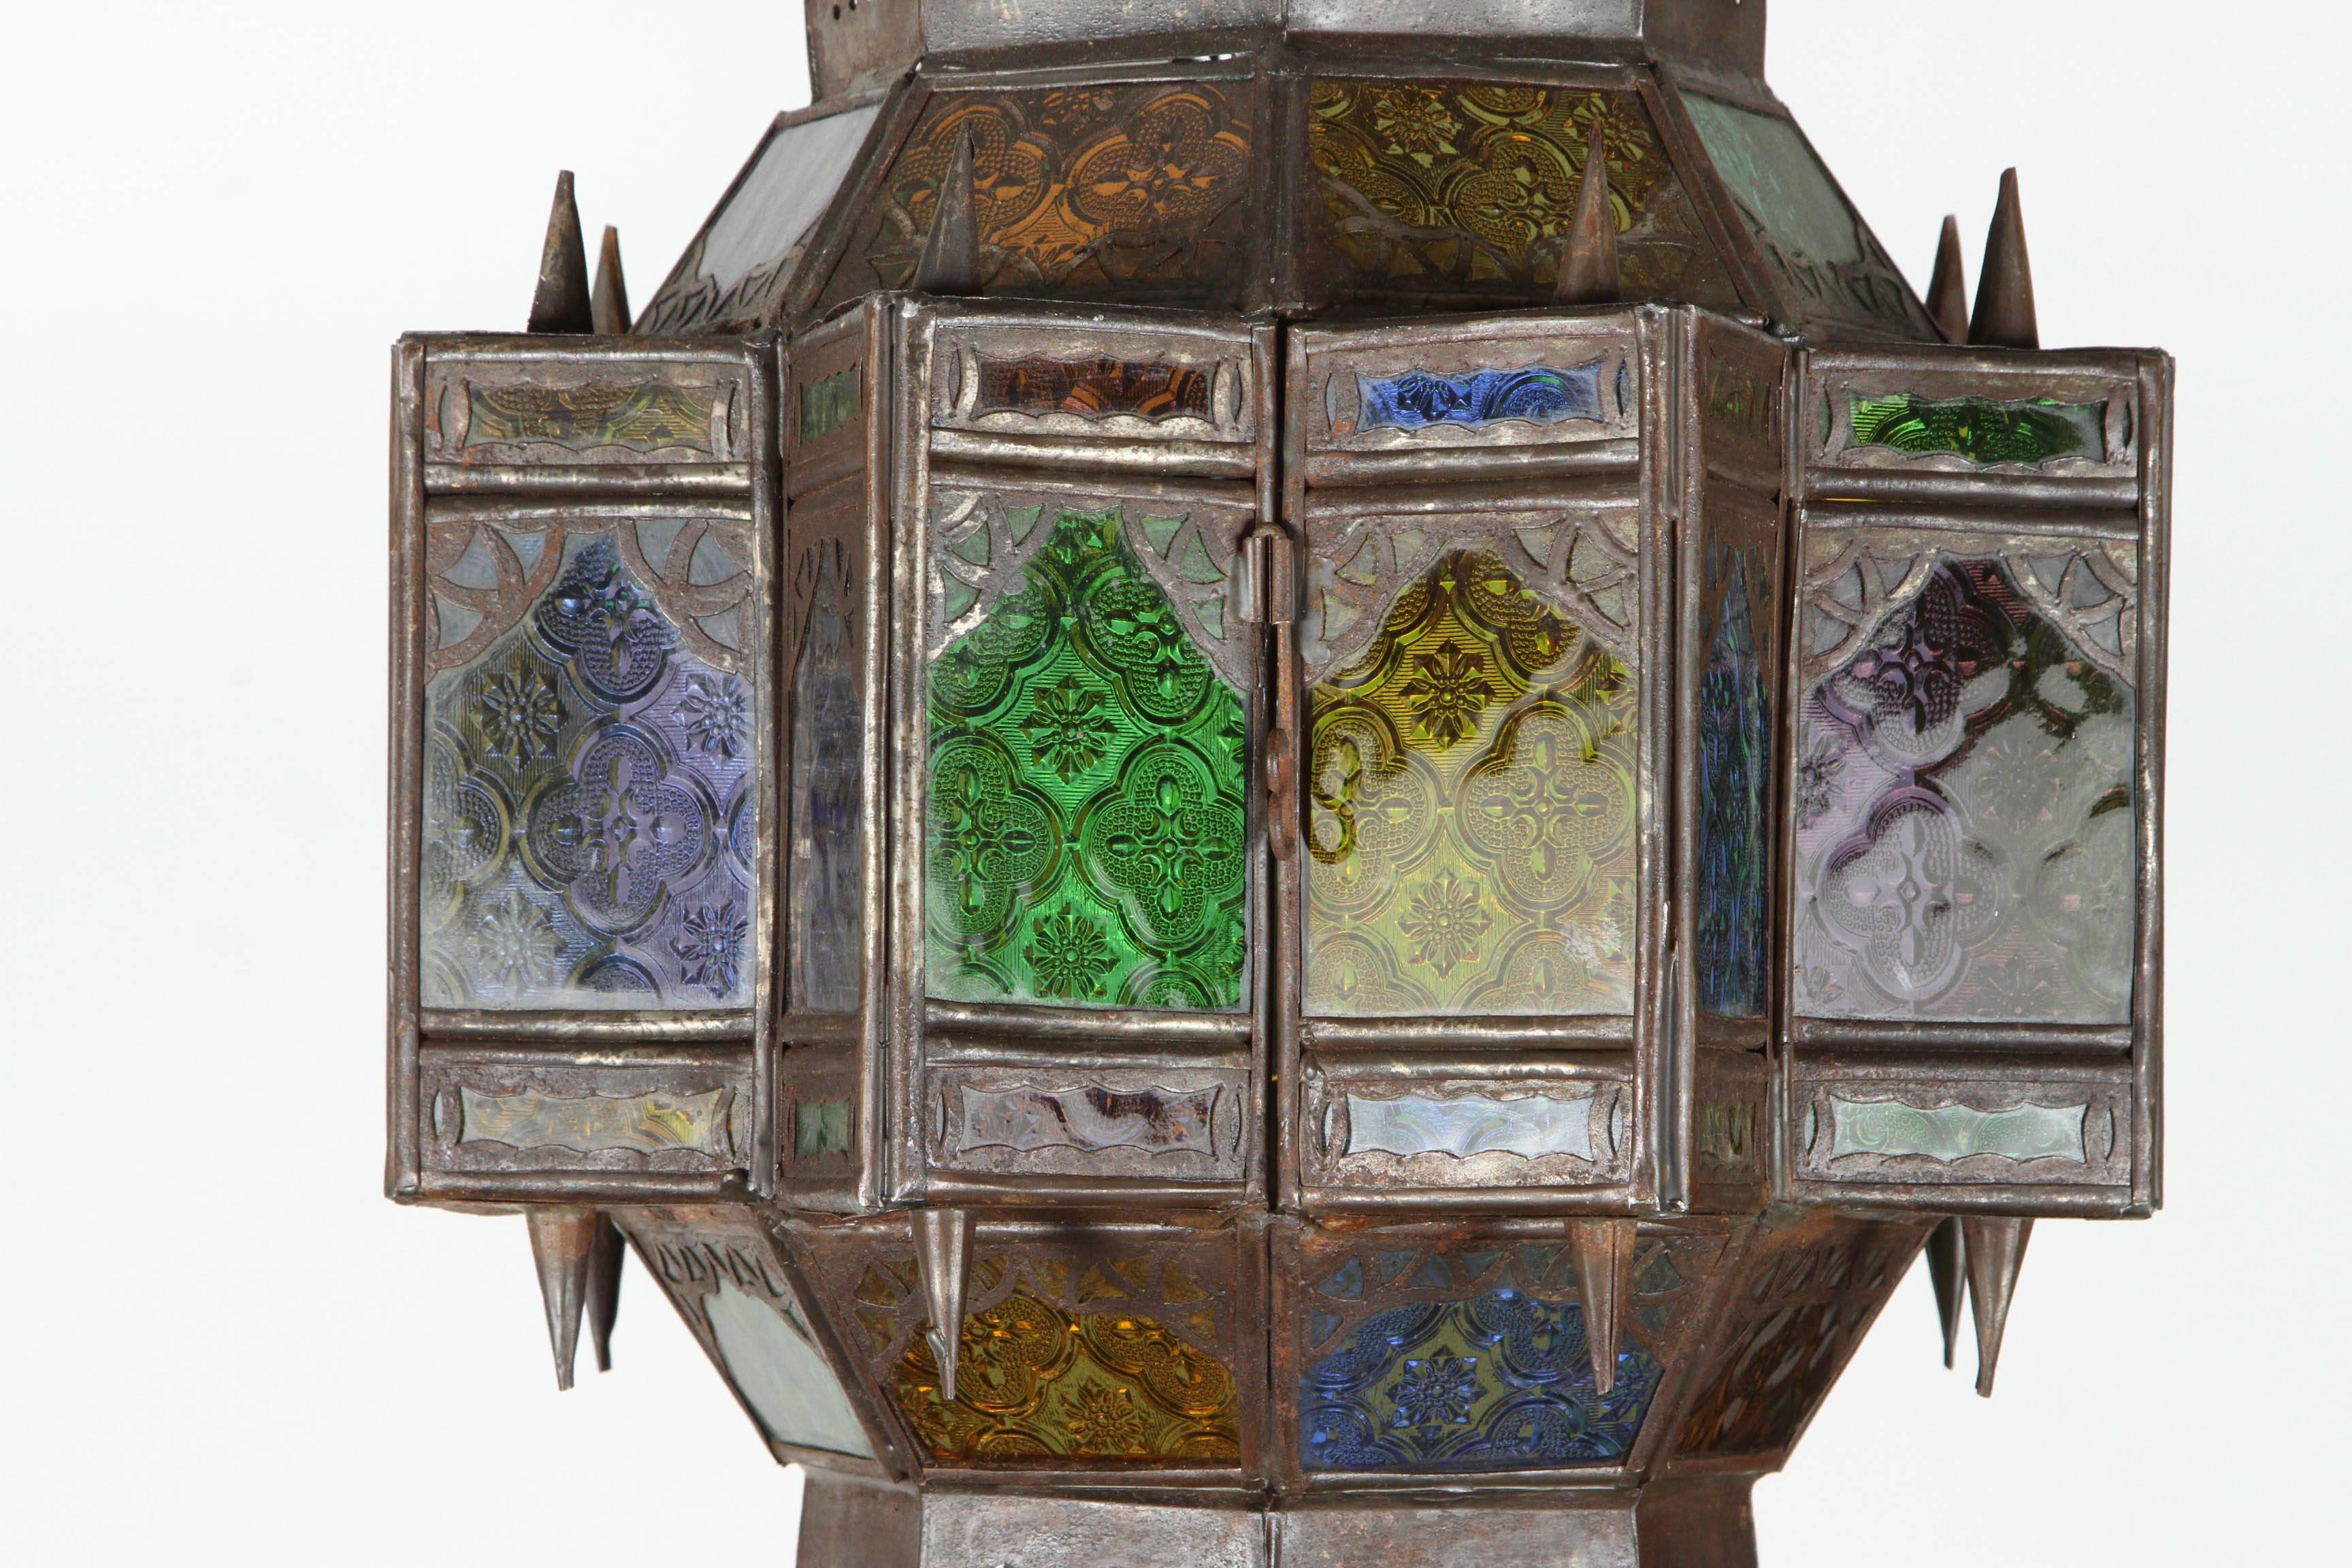 Handcrafted Moroccan glass pendant light fixture, very fine Moorish filigree metal hand-cut in Moorish designs.
Handmade in Marrakech by talented artisans, dark bronze color patina and multi-color glass in green, blue, lavender and amber